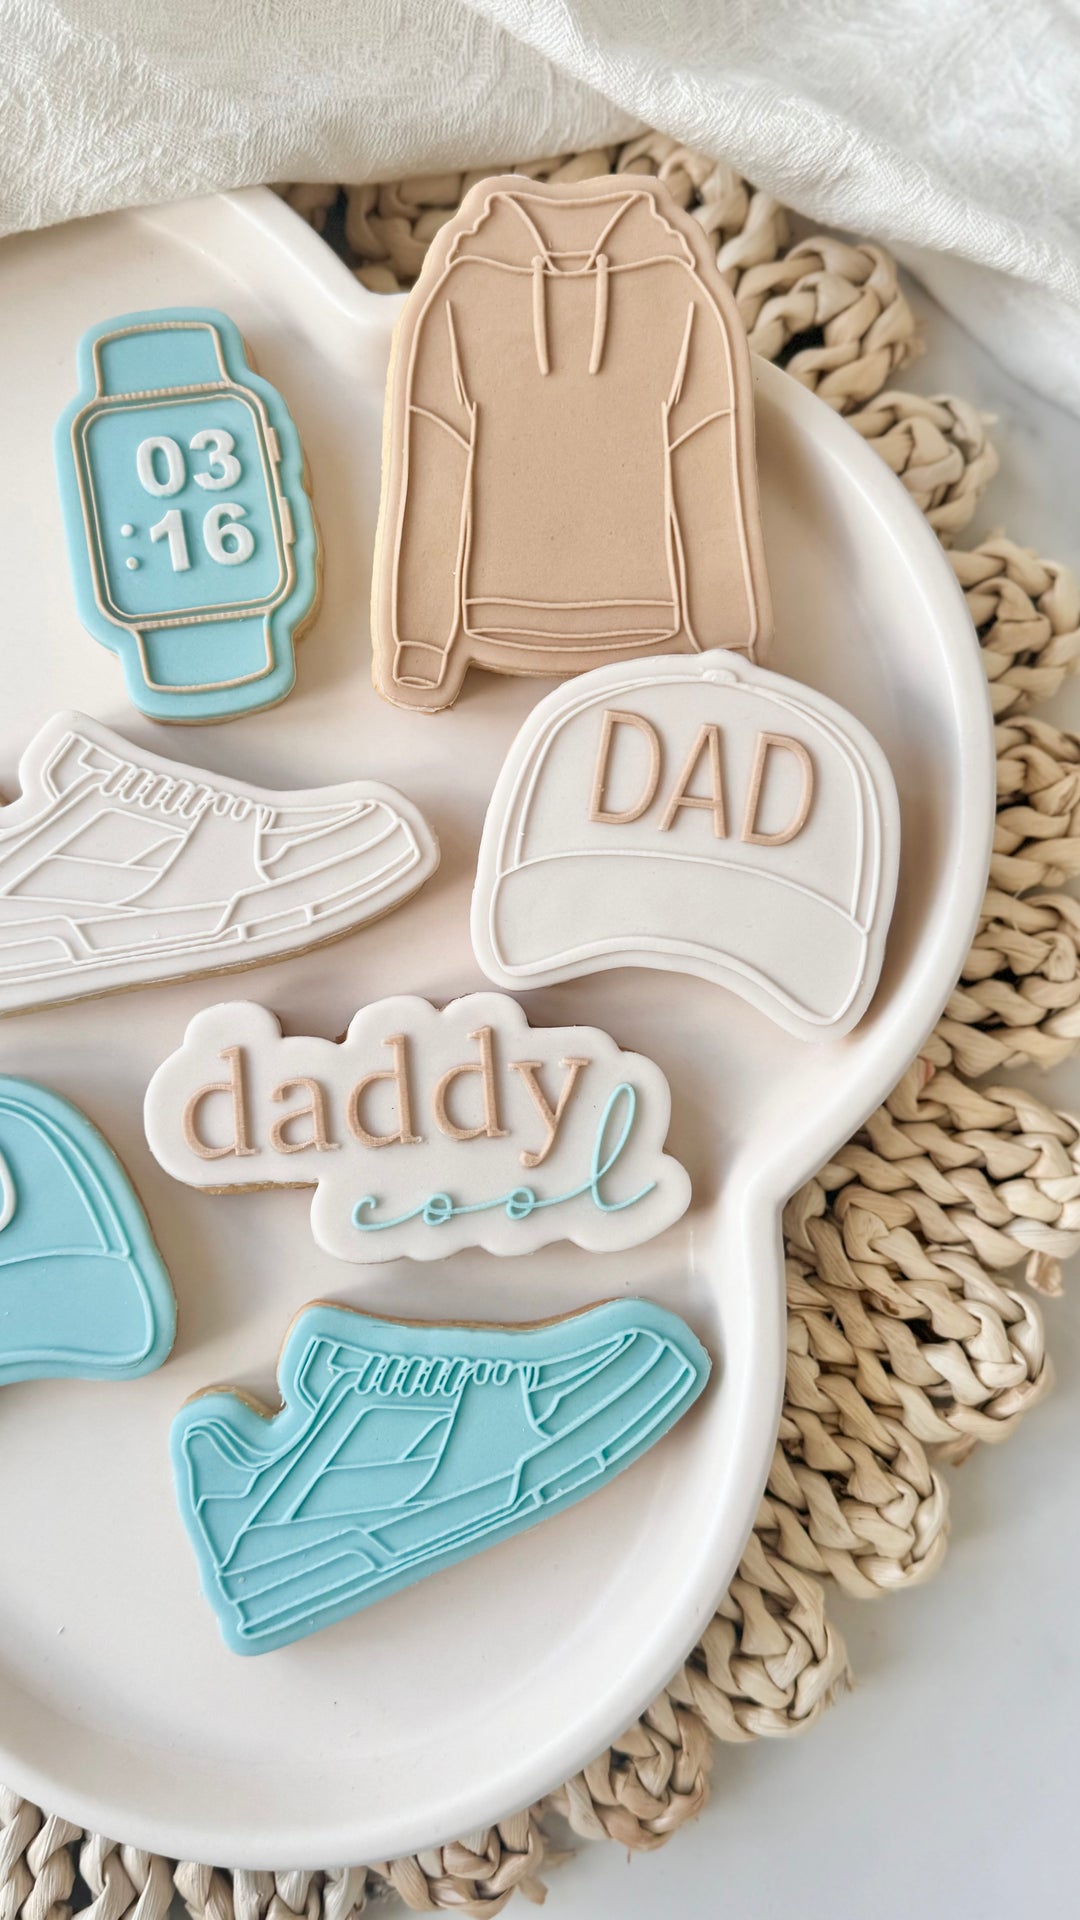 Daddy cool + cookie cutter